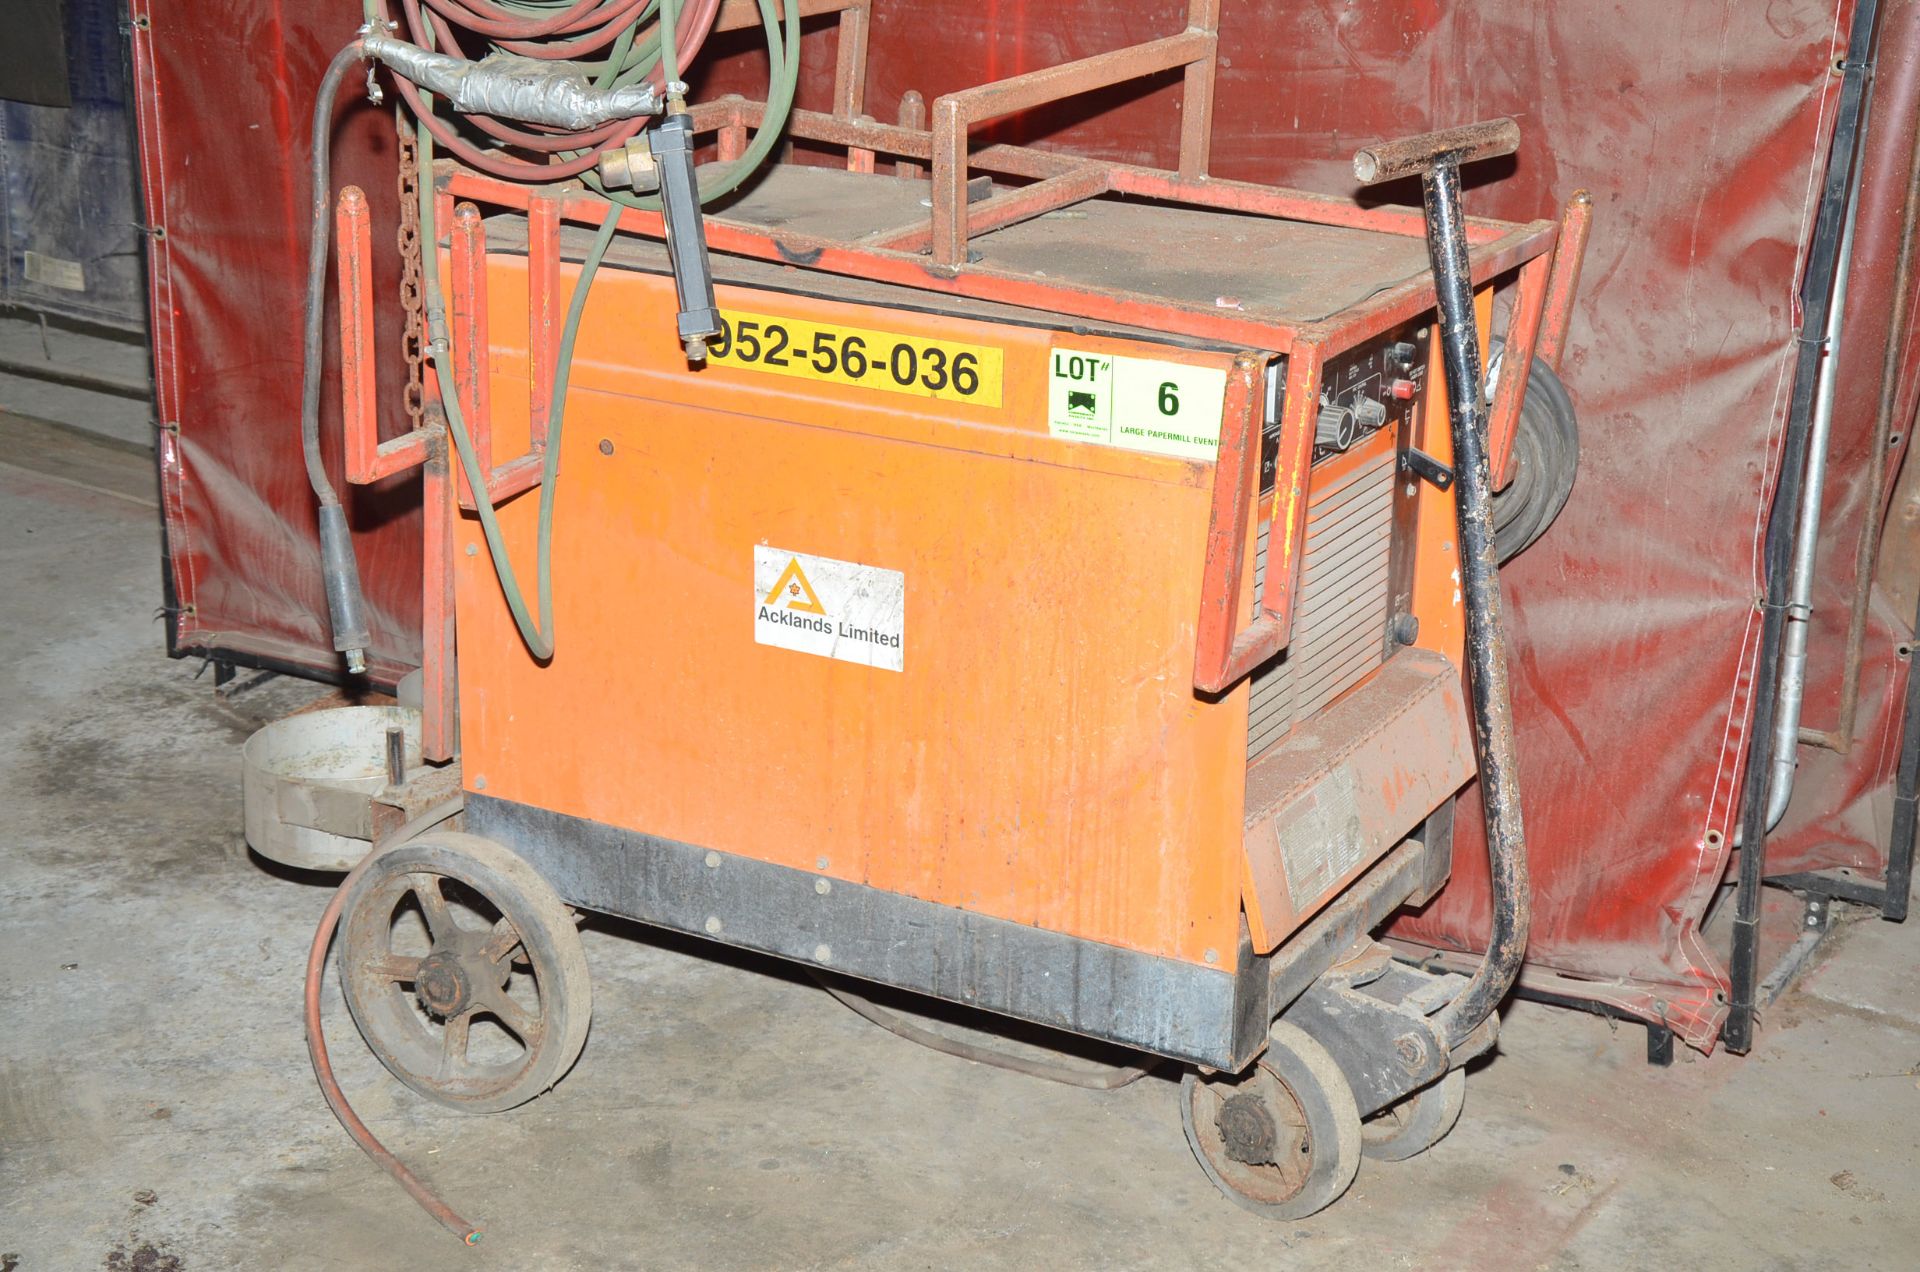 ACKLANDS 400 CC/CV-DC ARC WELDER WITH CABLES AND GUN, S/N: N/A [RIGGING FEES FOR LOT #6 - $85 USD